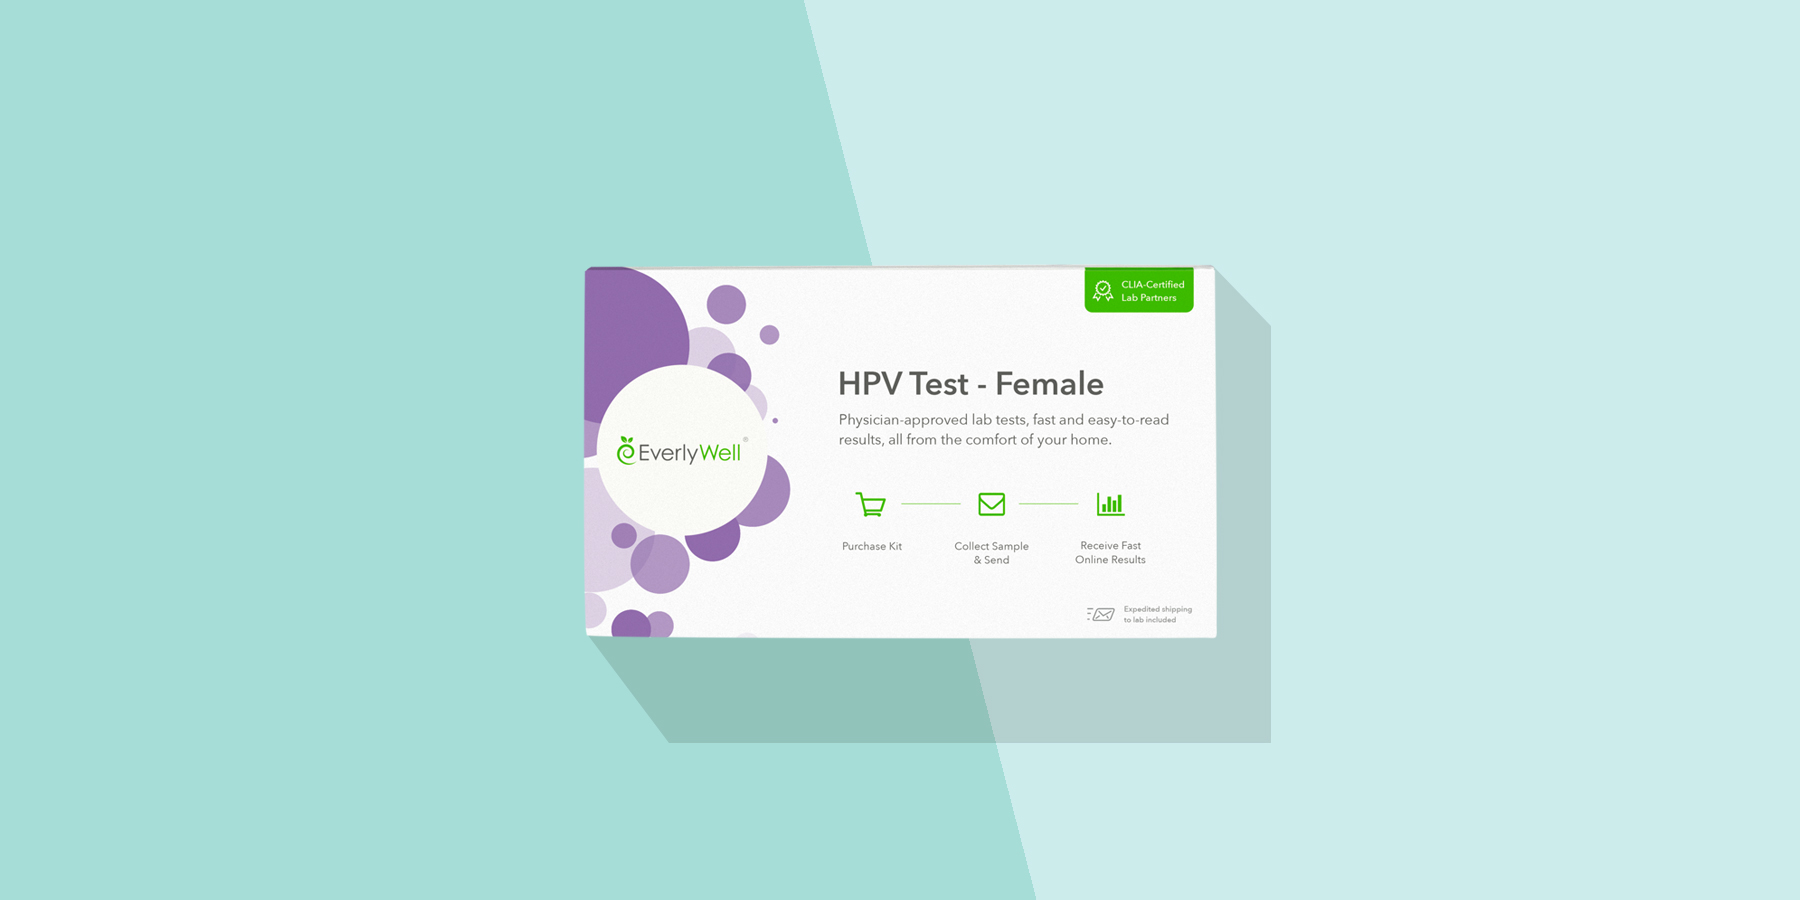 HPV testing at home